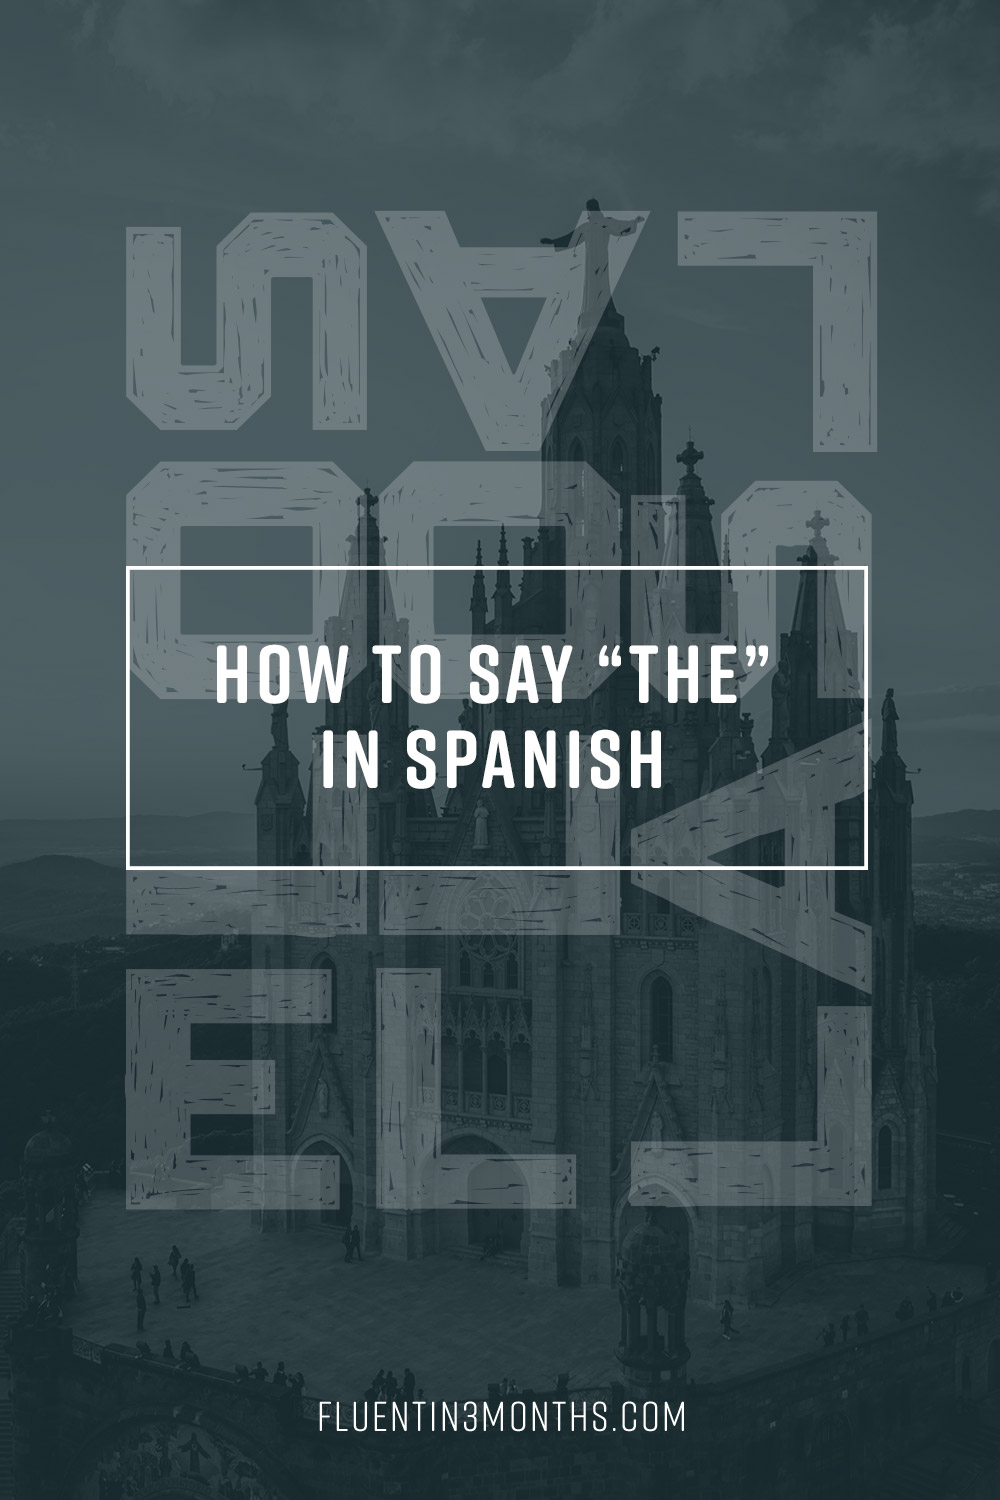 educational articles in spanish